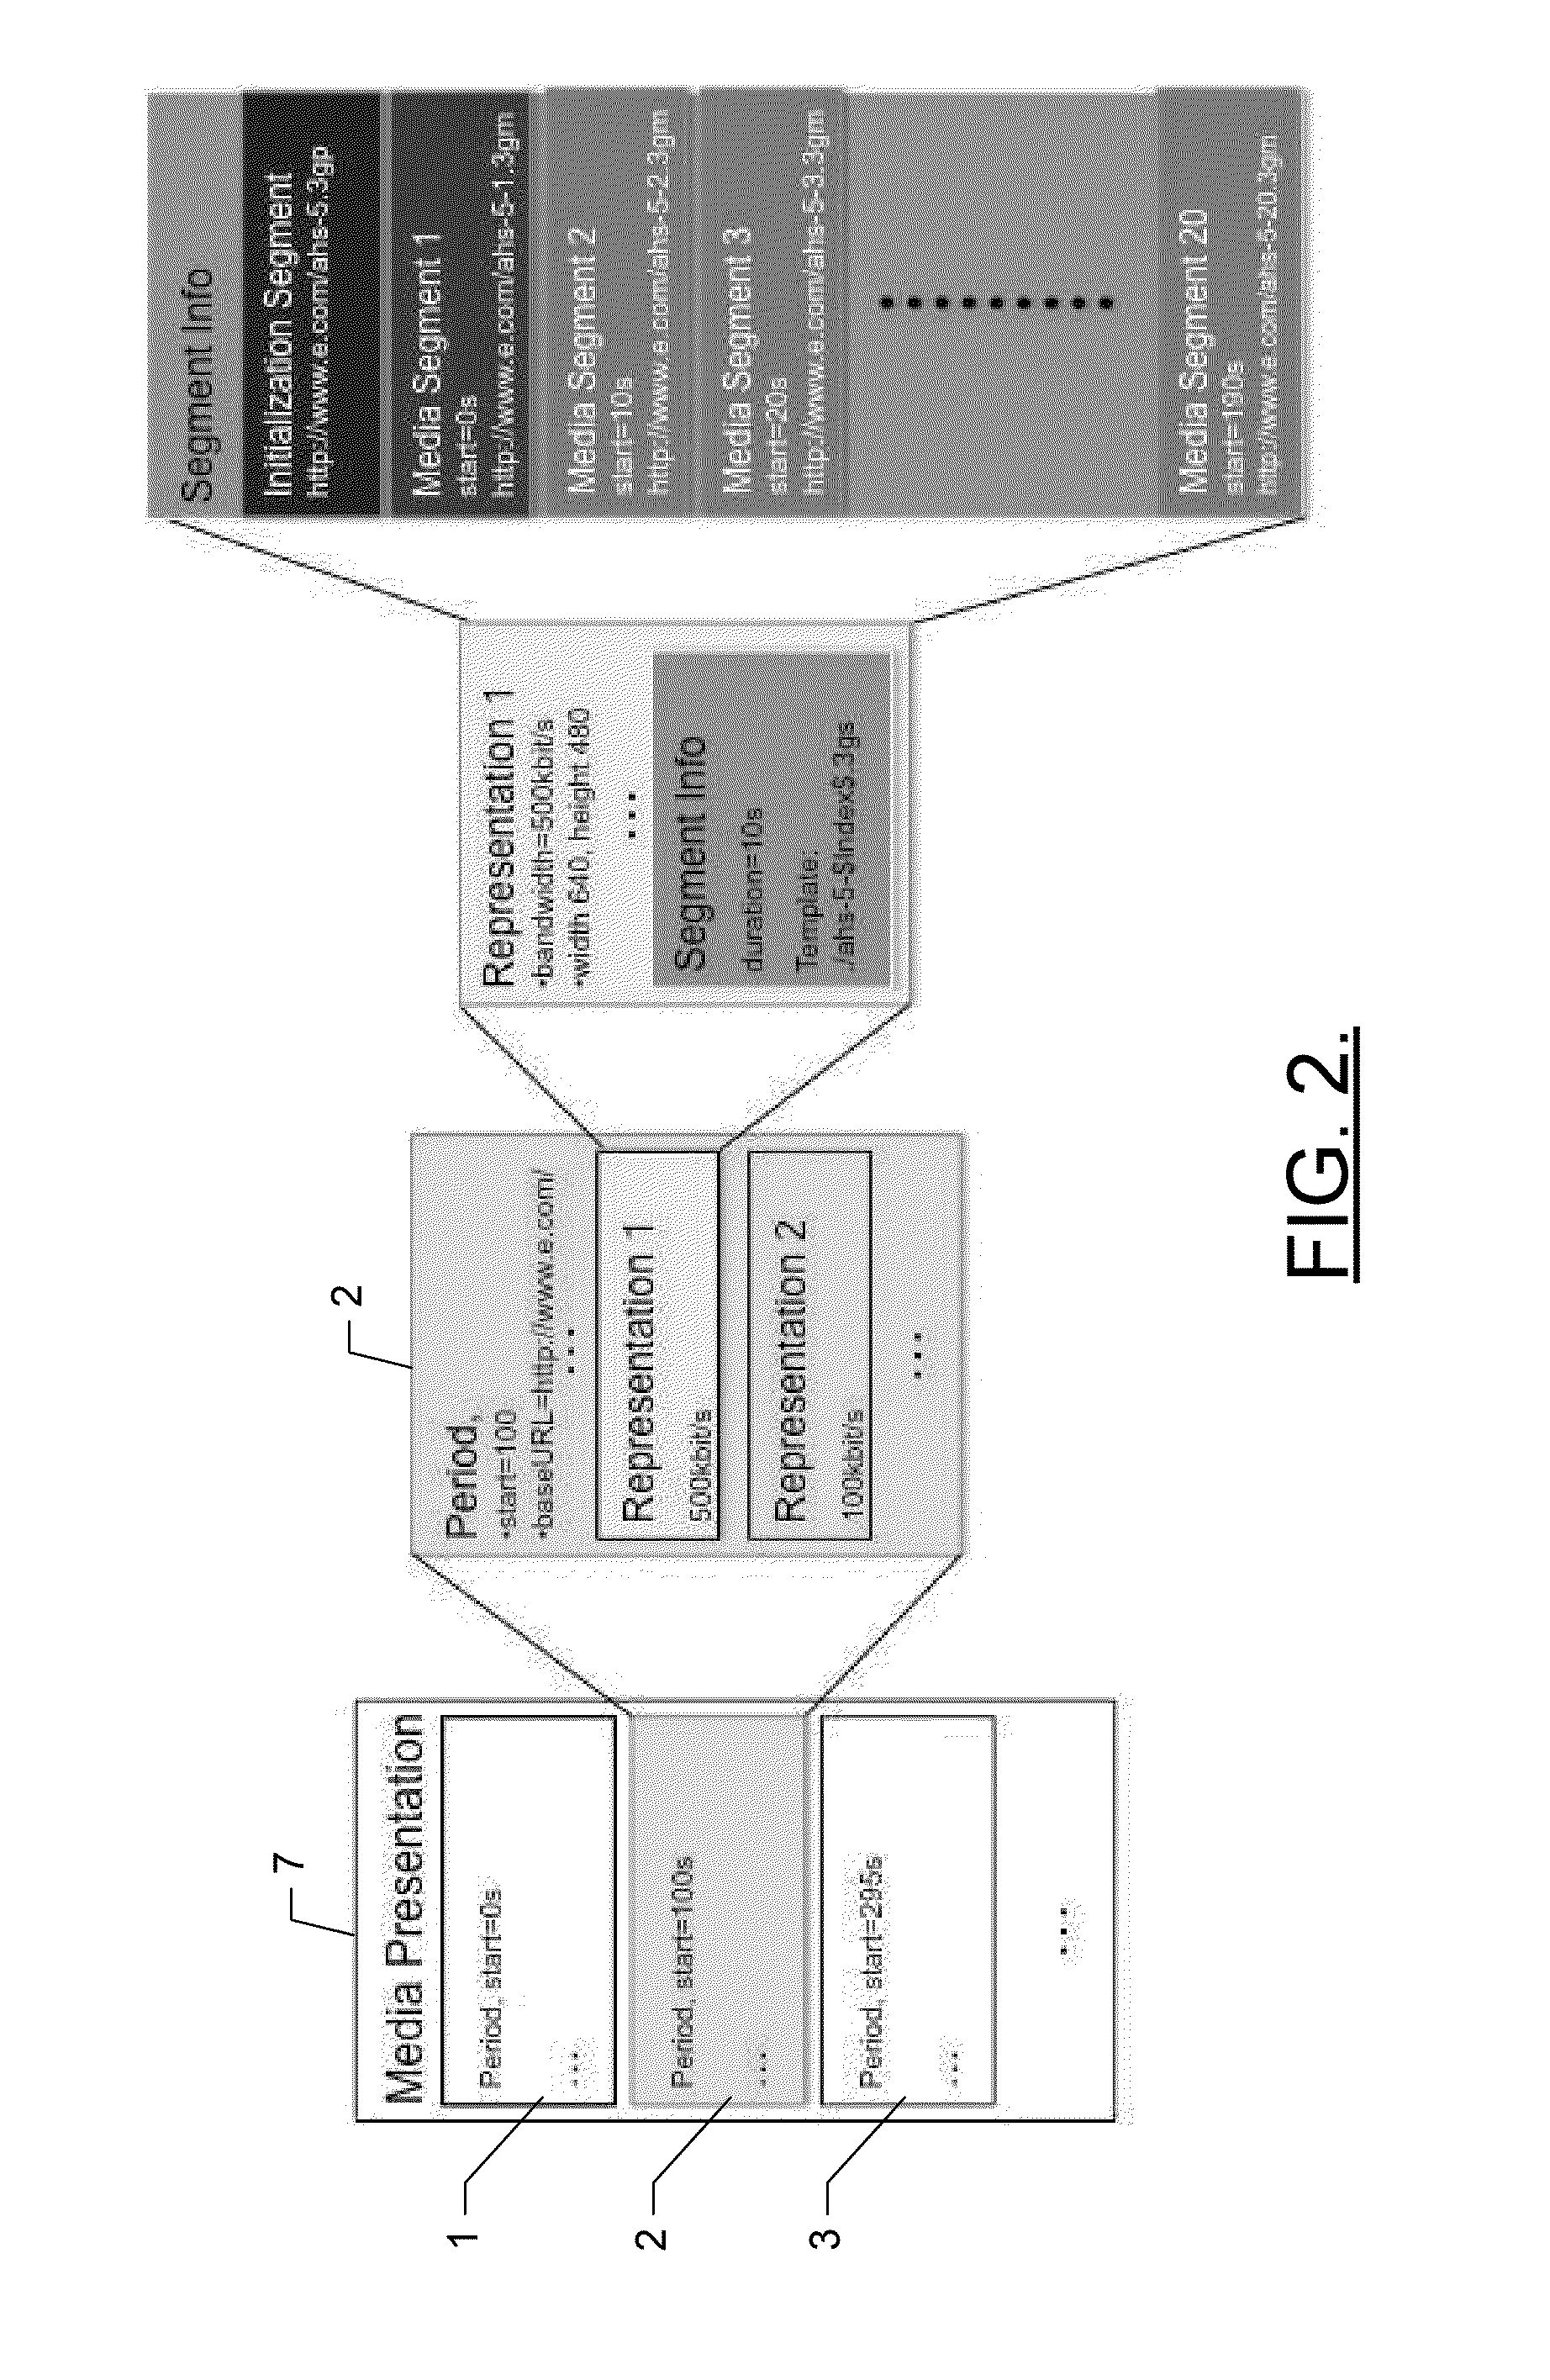 Methods, apparatuses and computer program products for enabling live sharing of data